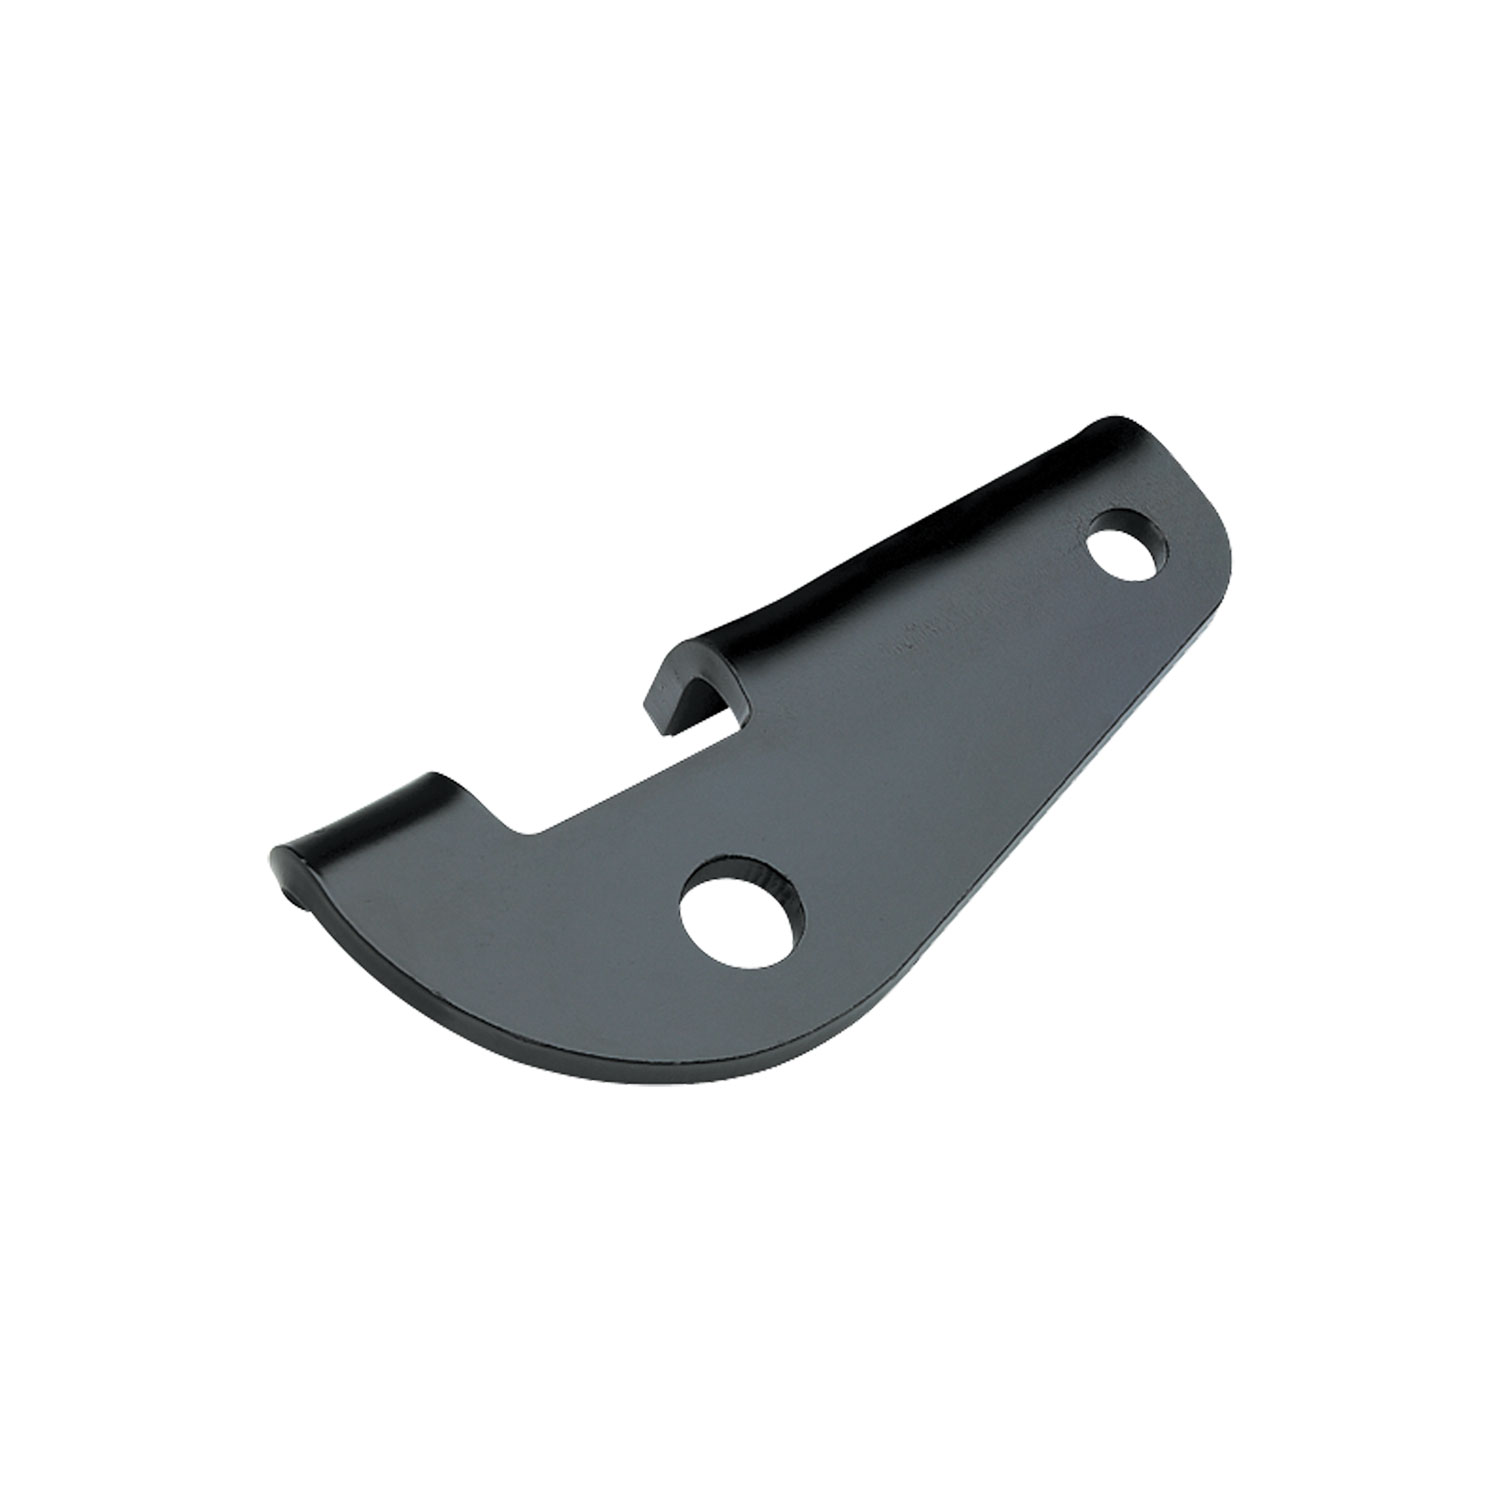 Reese Sway Control Adapter Bracket, use with 2 in. Sq. Ball Mounts